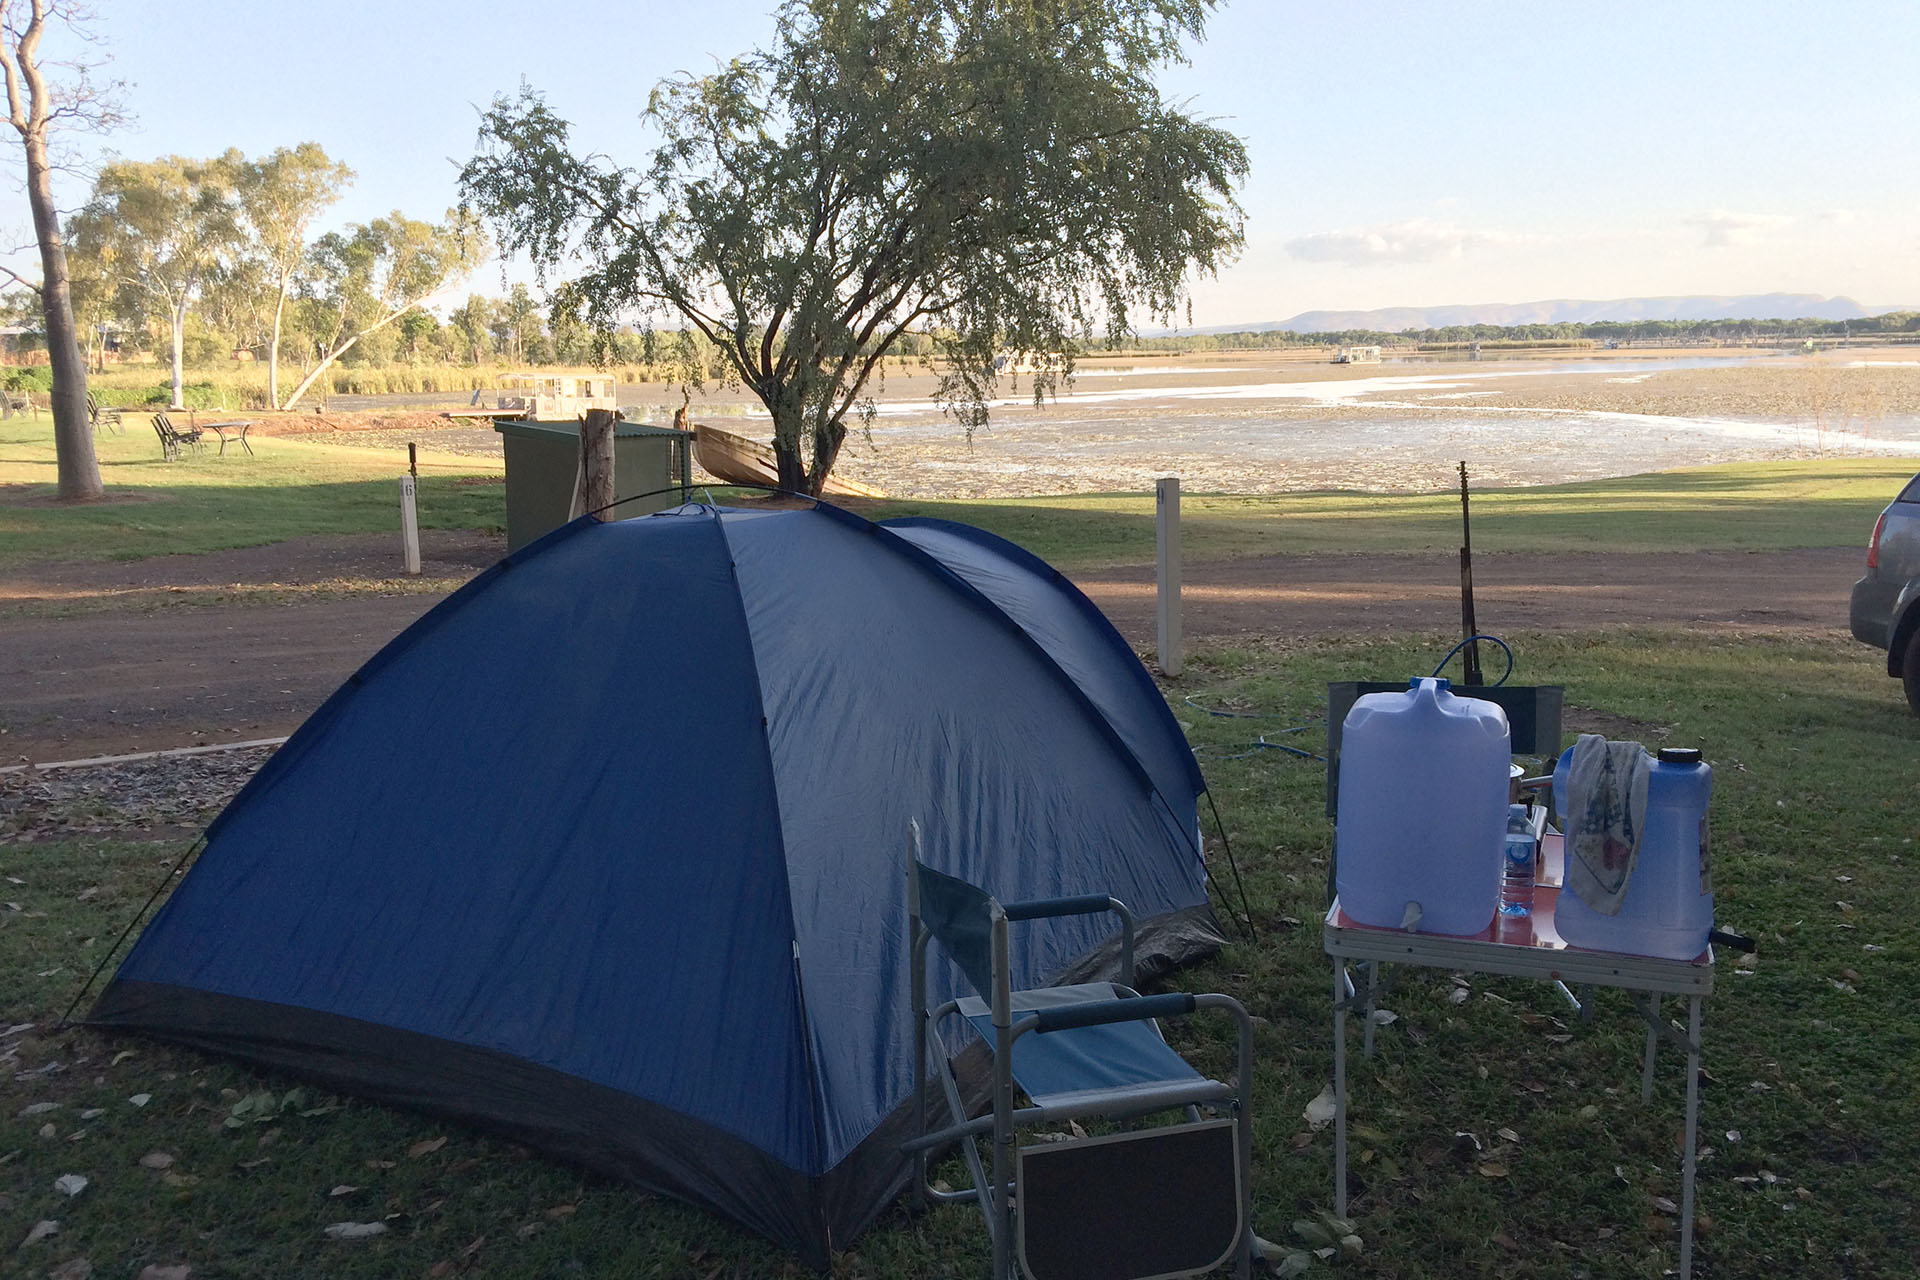 Today's camp on the bank of the Ord River.